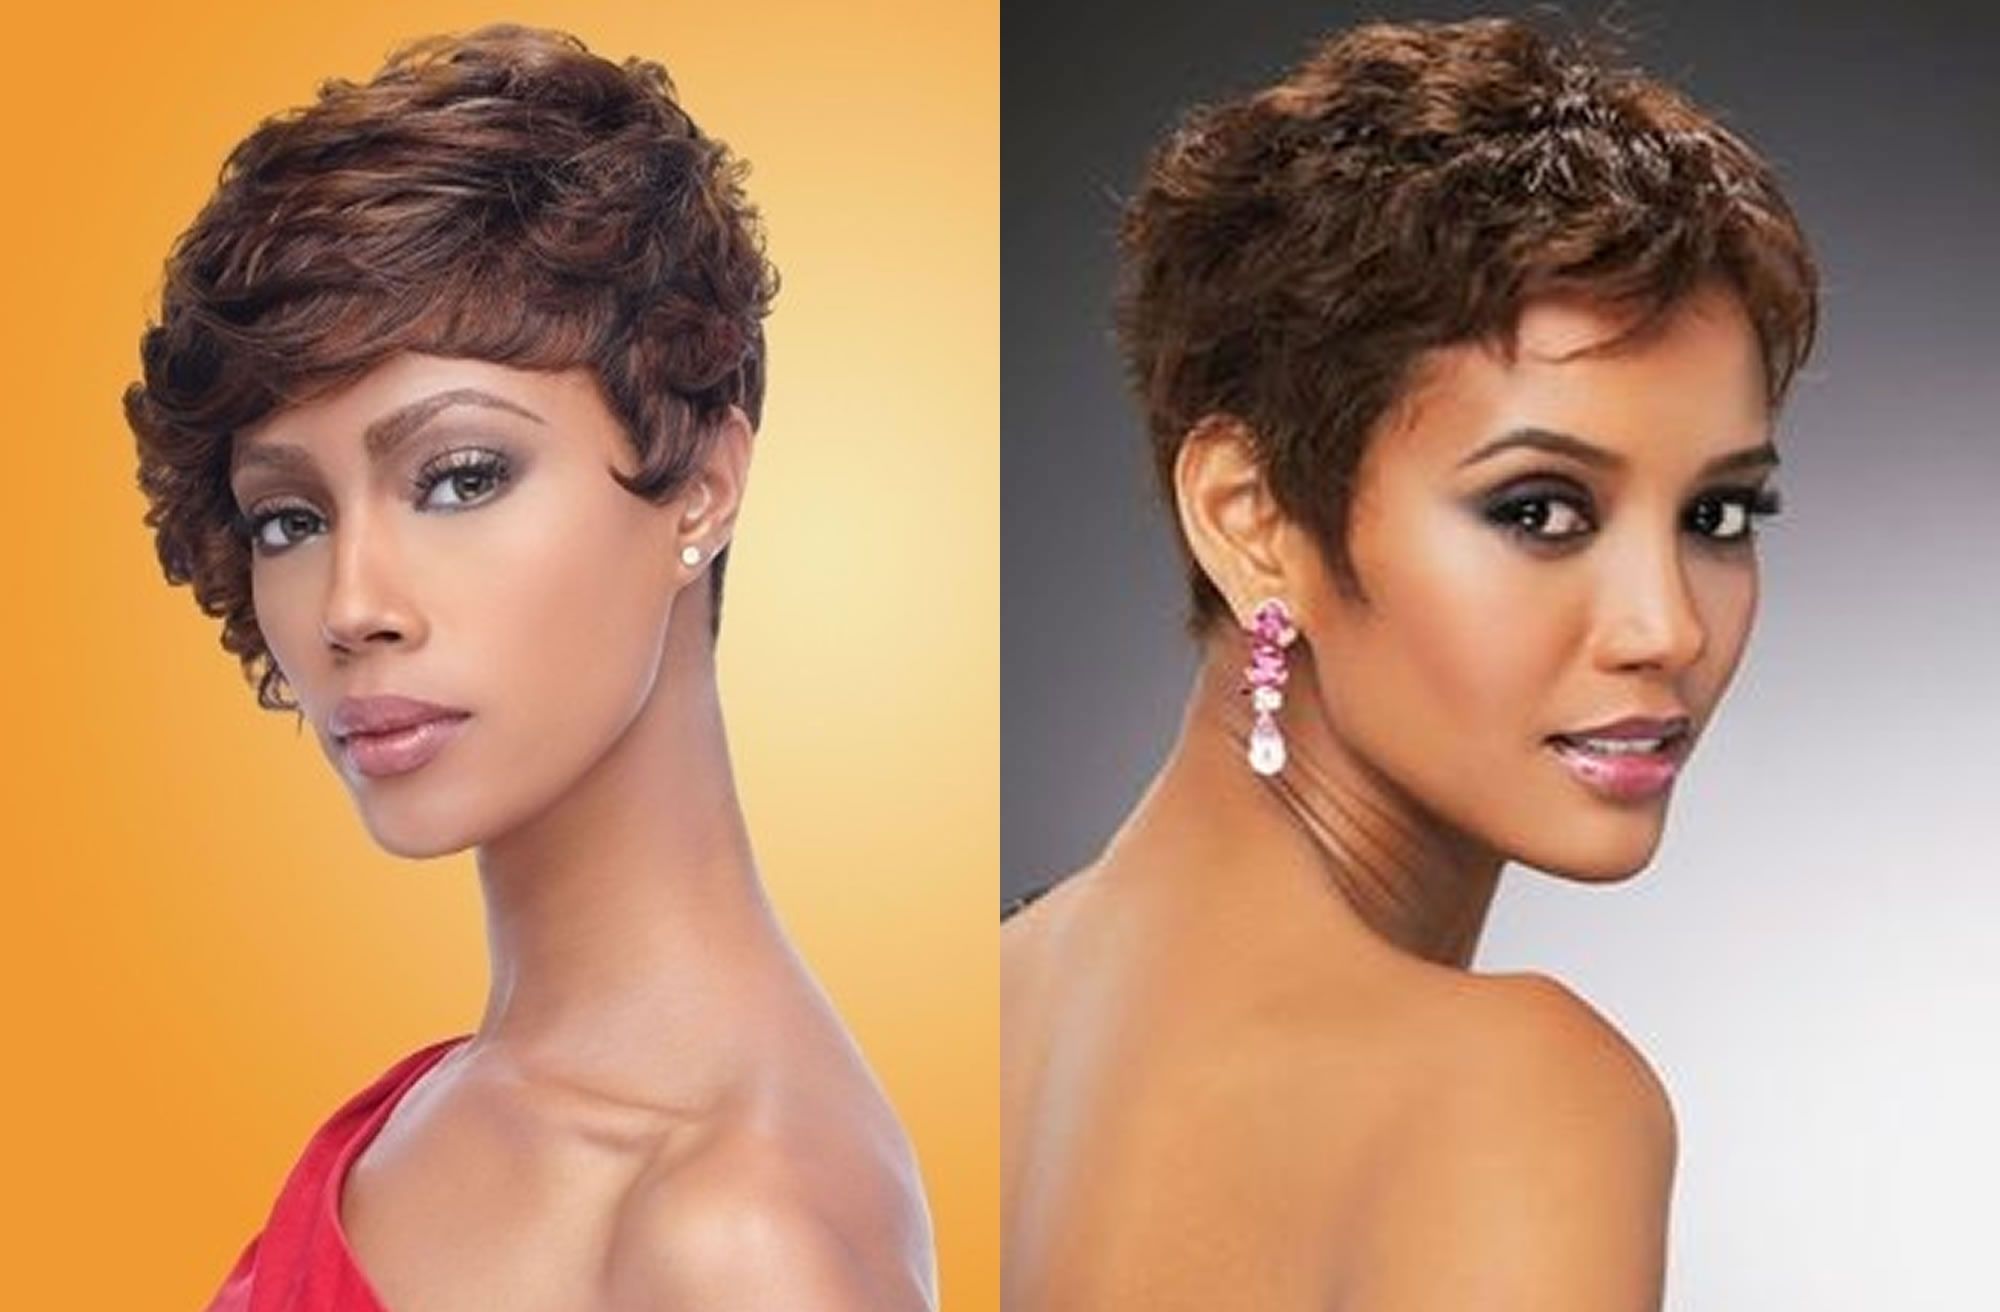 Pixie Hairstyles For Black Women – 60 Cool Short Haircuts For 2017 Within Best And Newest Short Pixie Hairstyles For Wavy Hair (View 9 of 15)